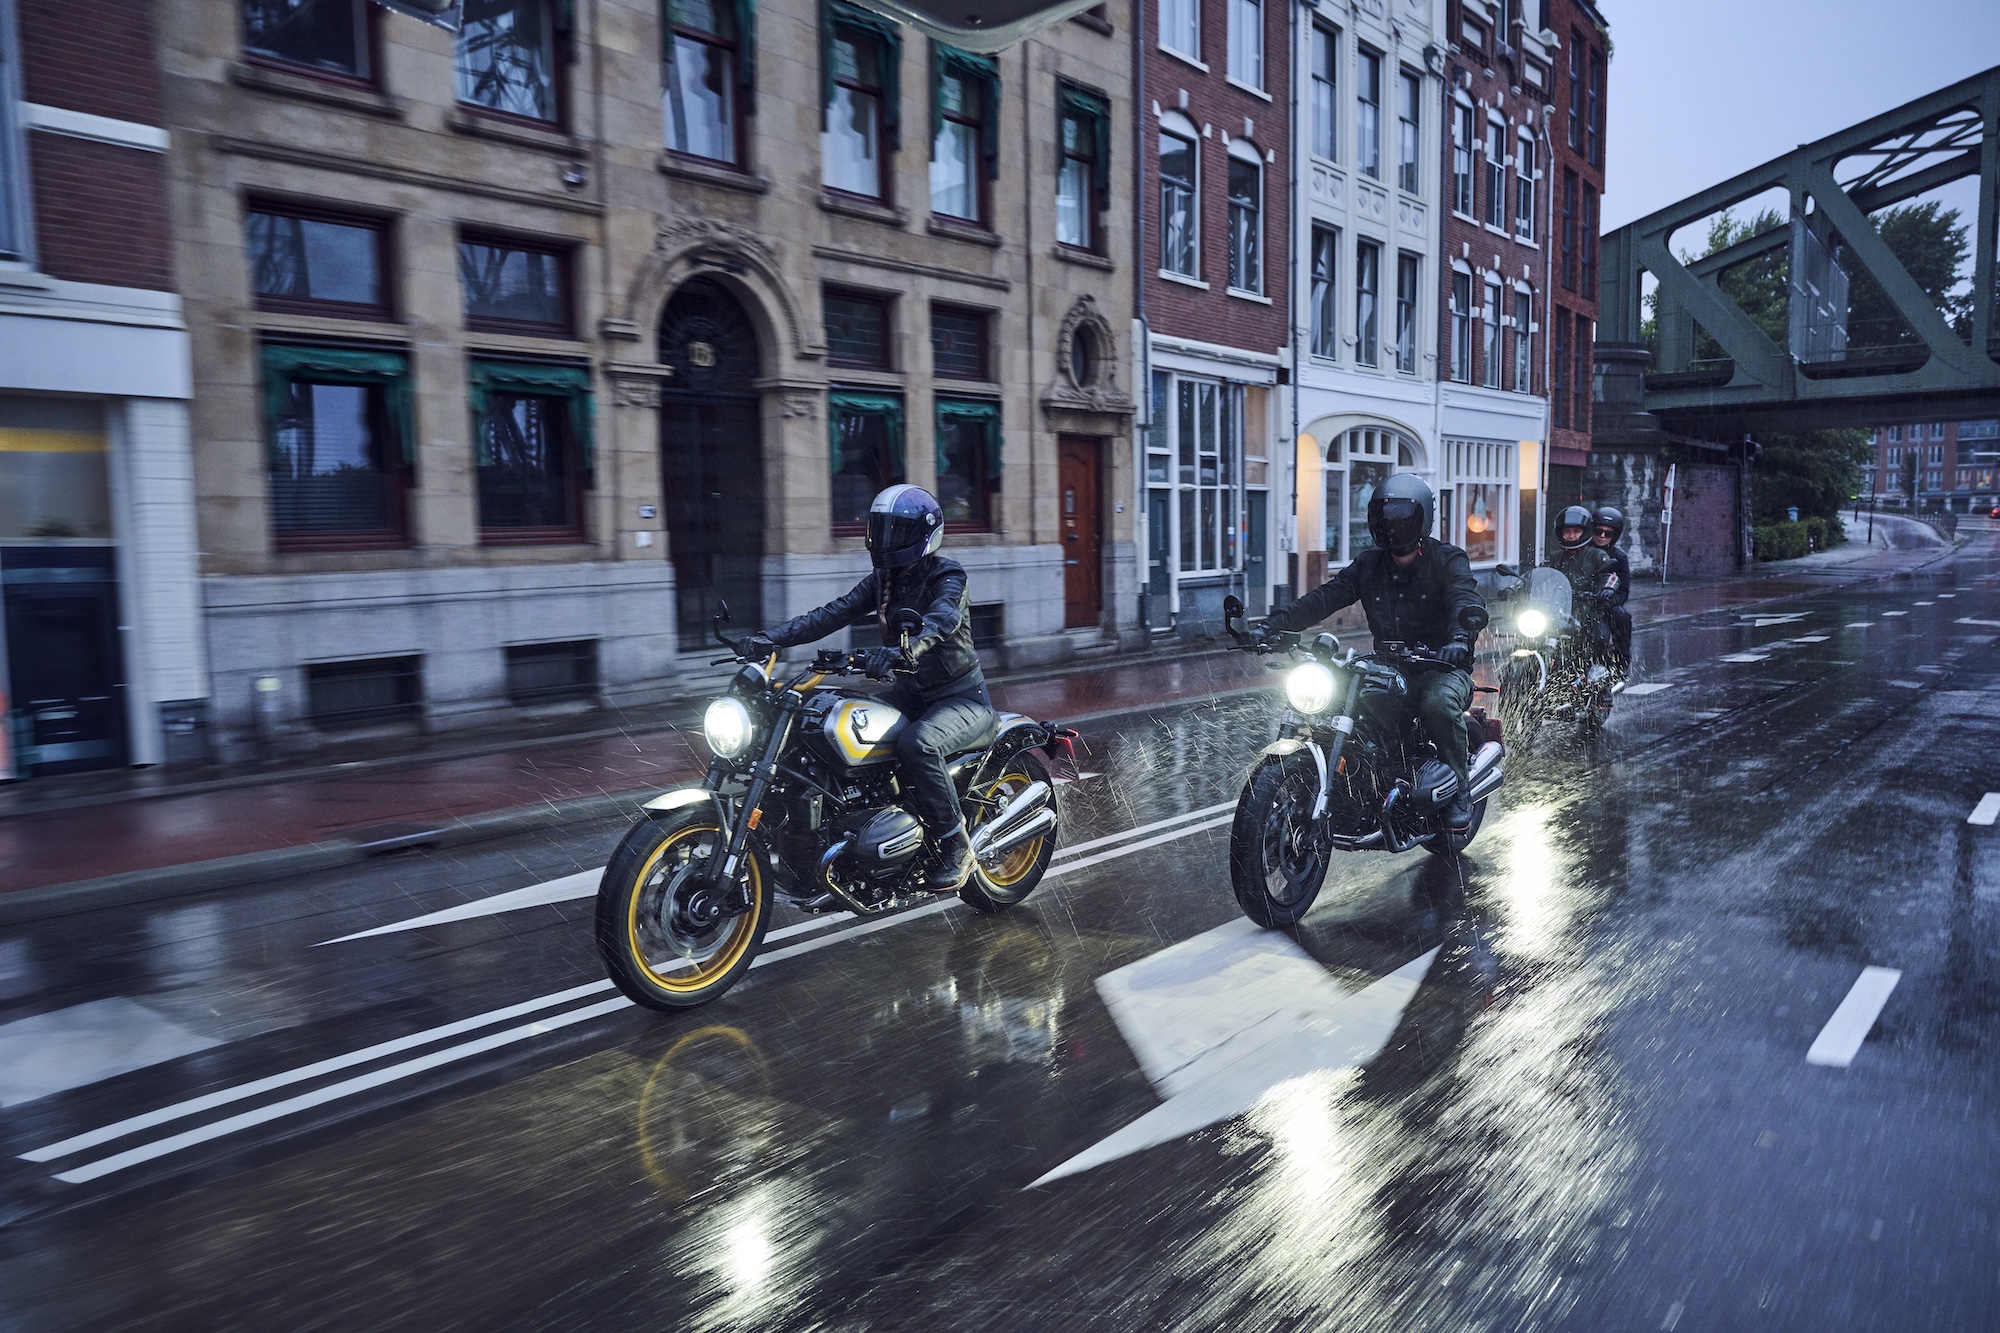 Three motorcyclists in the rain.